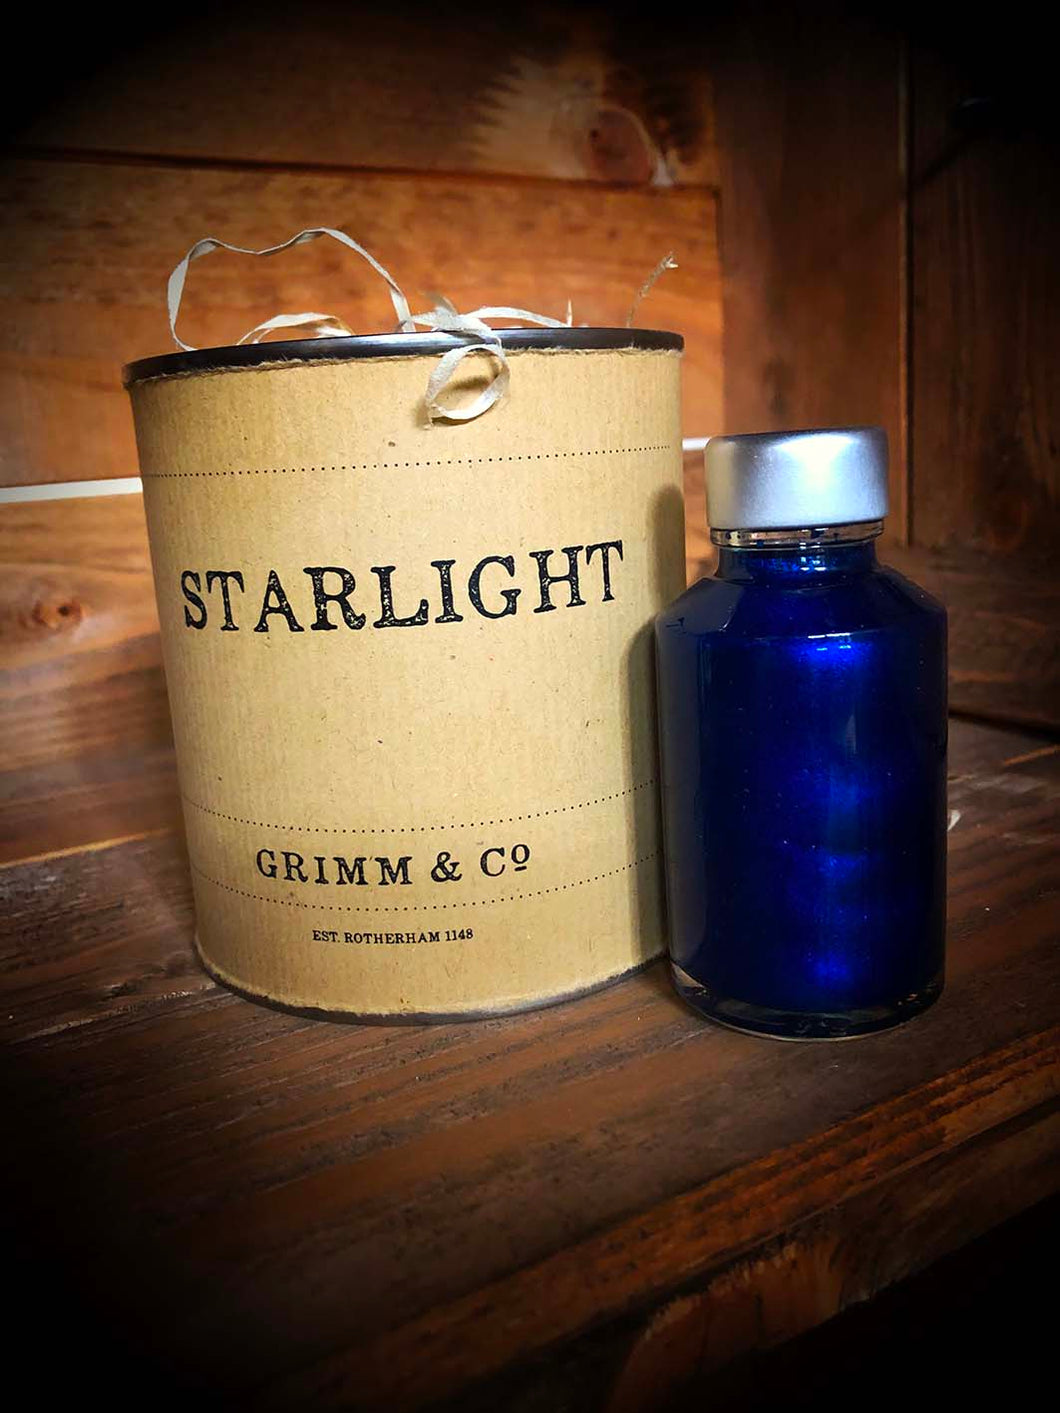 Starlight, a tin containing blue and silver shimmering ink suitable for writing and drawing. Ink bottle is shown next to the tin.